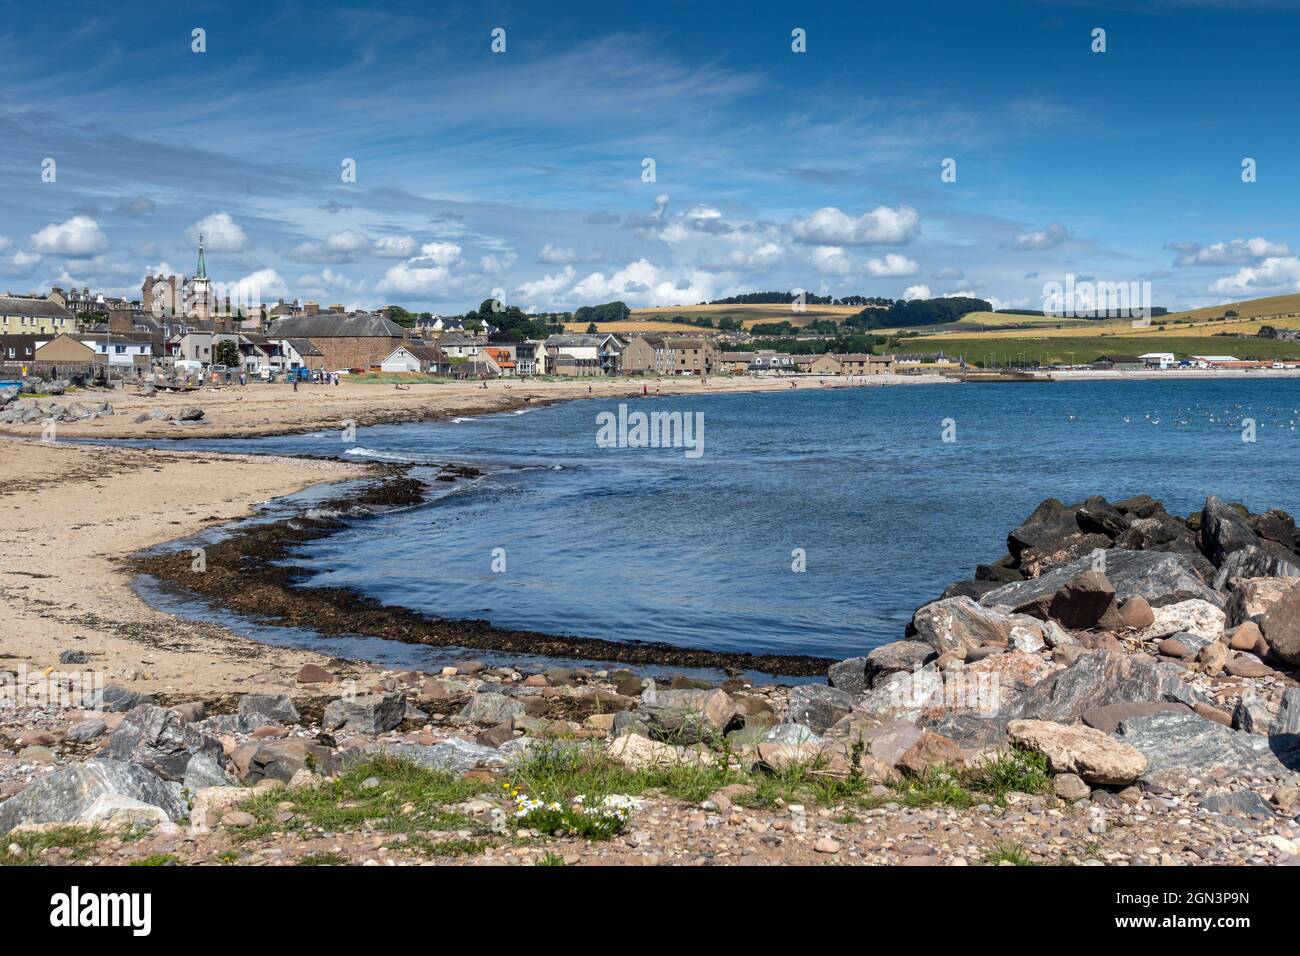 The Bay and Beach at Stonehaven, a pretty harbour town south of Aberdeen that is a popular destination on the Aberdeenshire coastal trail. Stock Photo